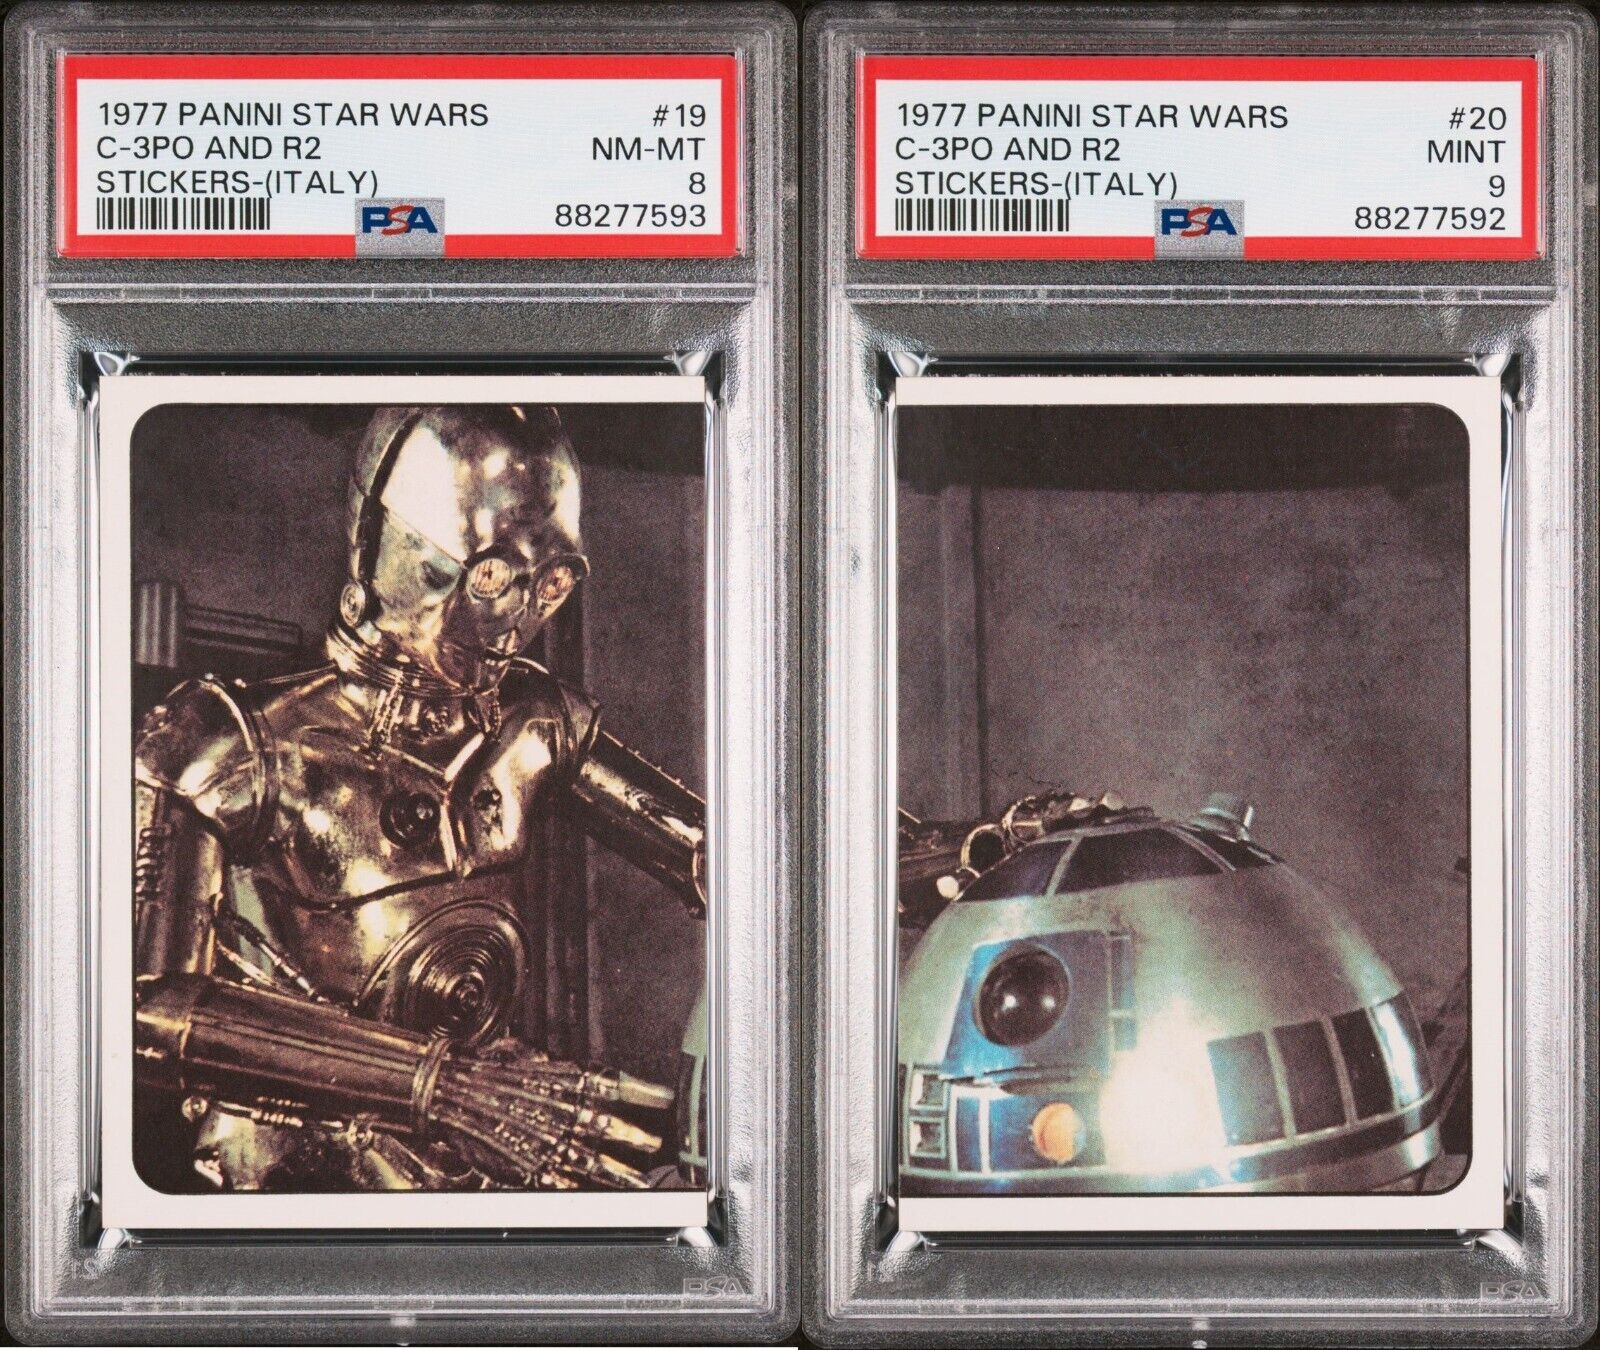 1977 PANINI STICKERS STAR WARS (ITALY) 19 & 20 C-3PO AND R2 PSA 8 and 9